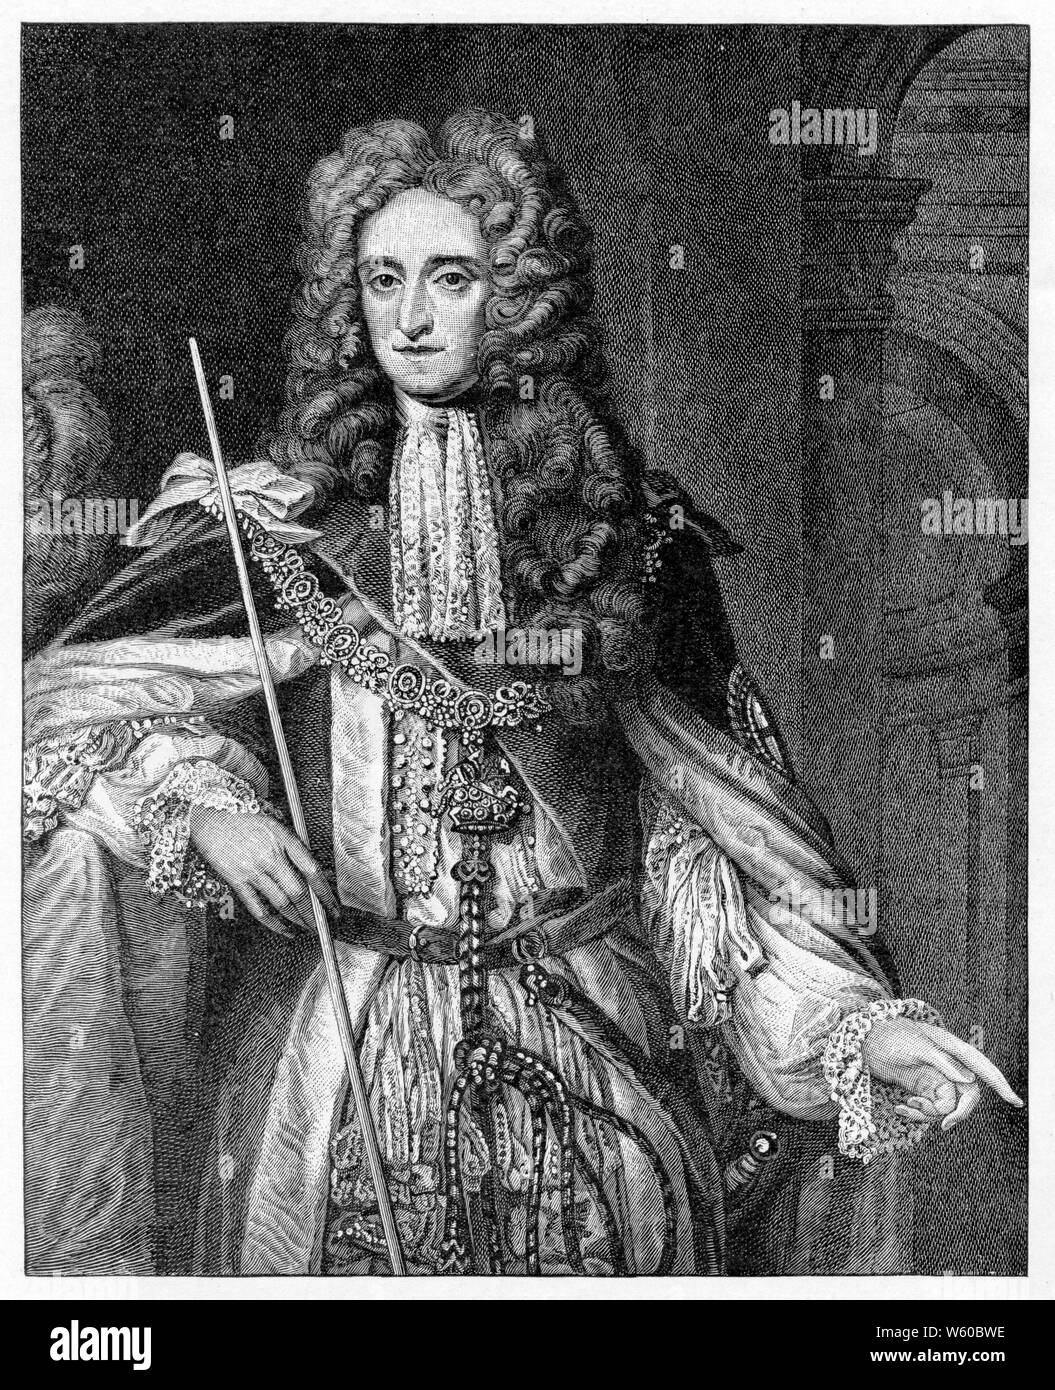 Thomas Osborne, 1st Duke of Leeds ('Lord Danby'), c18th century. After Johann Kerseboom (d1708) & Jan van der Vaart  (c1650-1727). Thomas Osborne English politician who was part of the Immortal Seven group that invited William III, Prince of Orange, to depose James II of England as monarch during the Glorious Revolution. Stock Photo